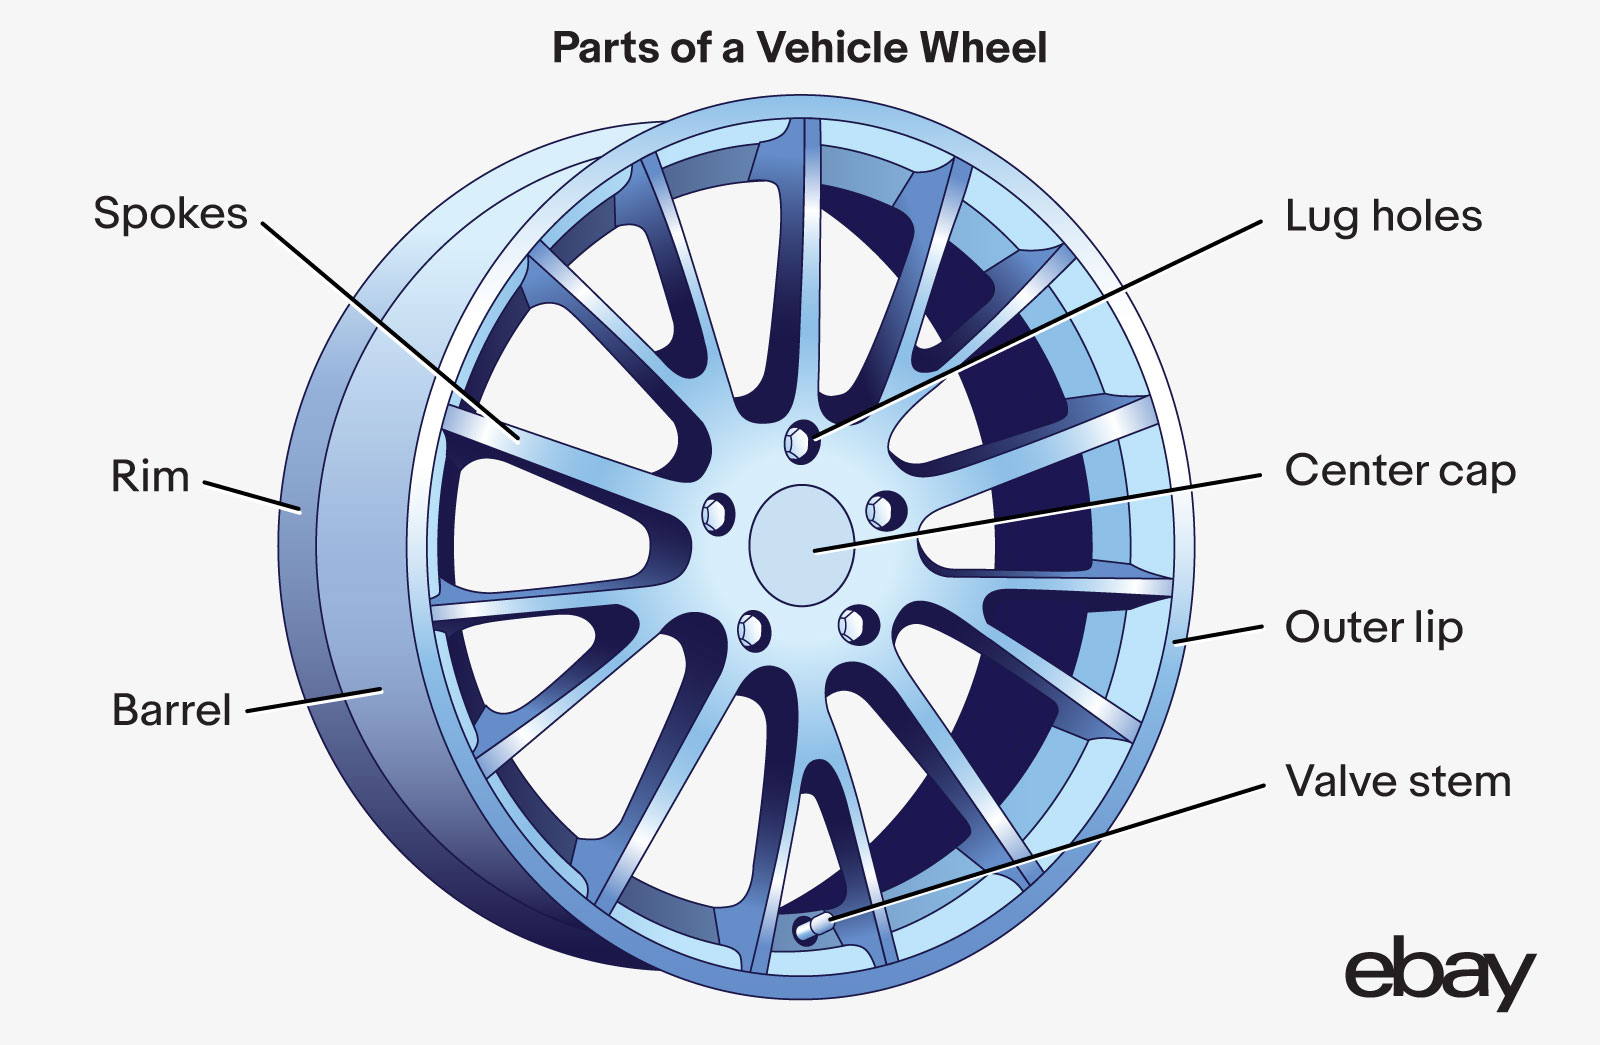 eBay illustration for parts of a vehicle wheel